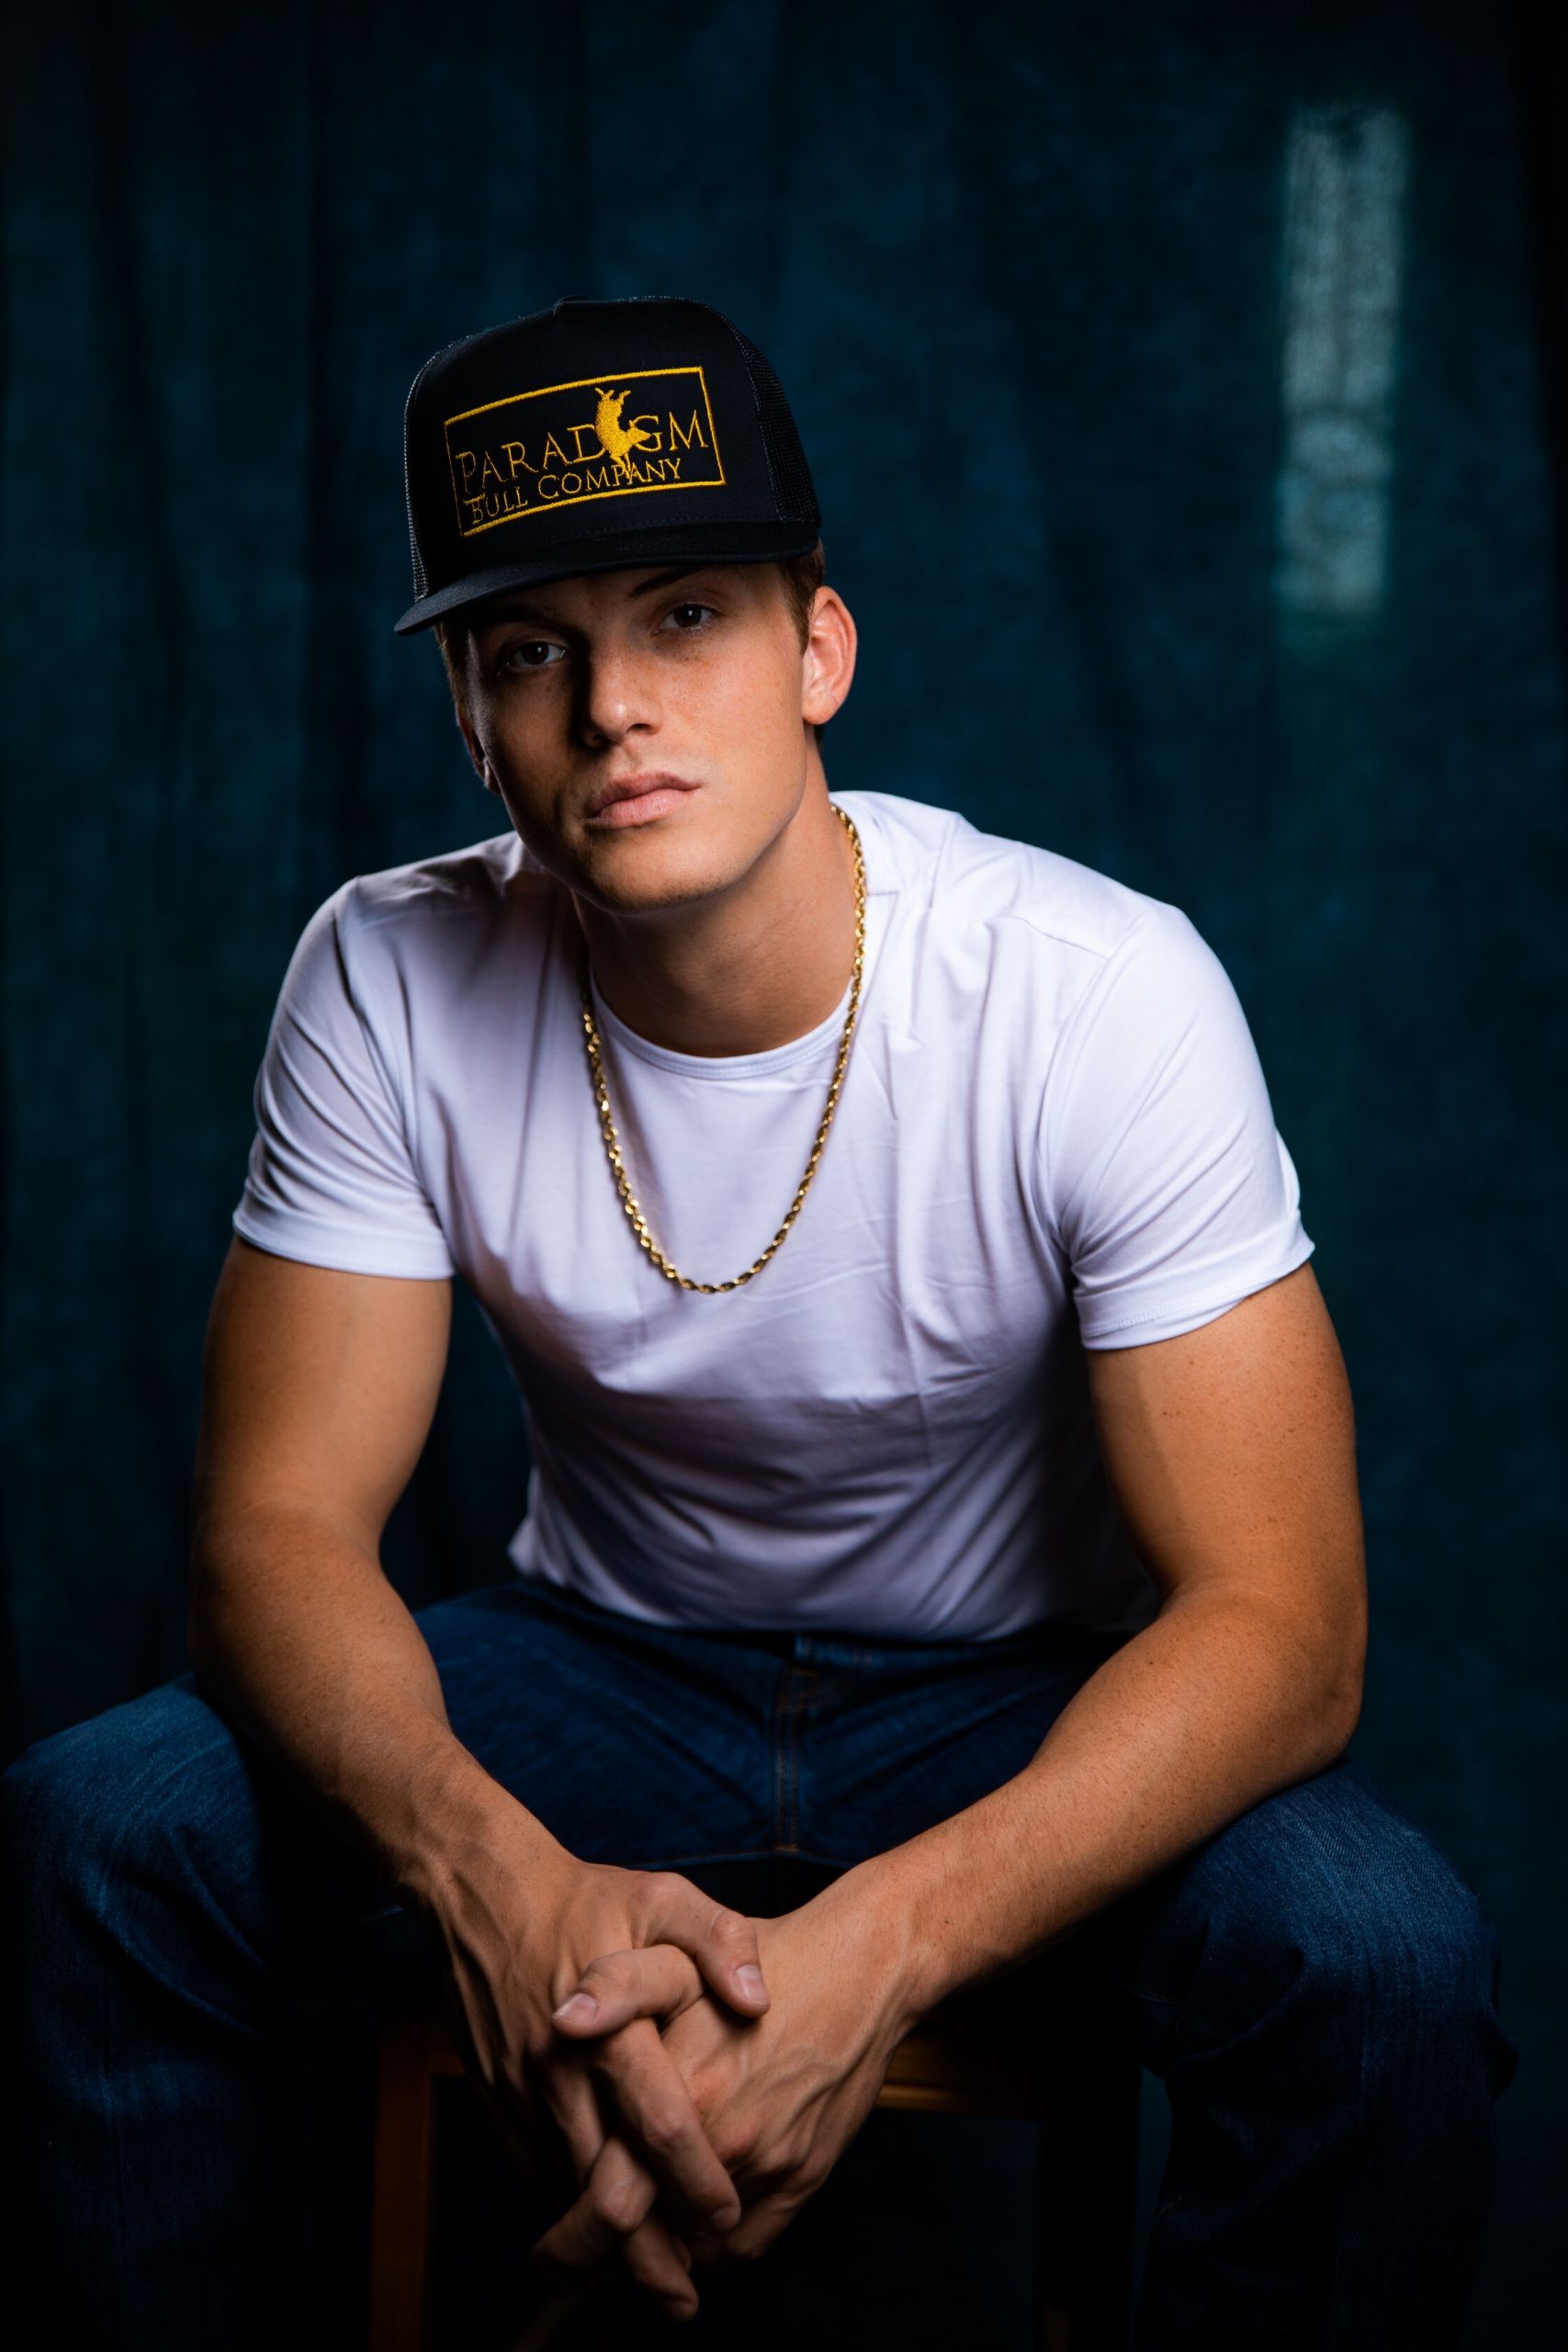 Parker McCollum Releases Spotify Single of a Strait Classic